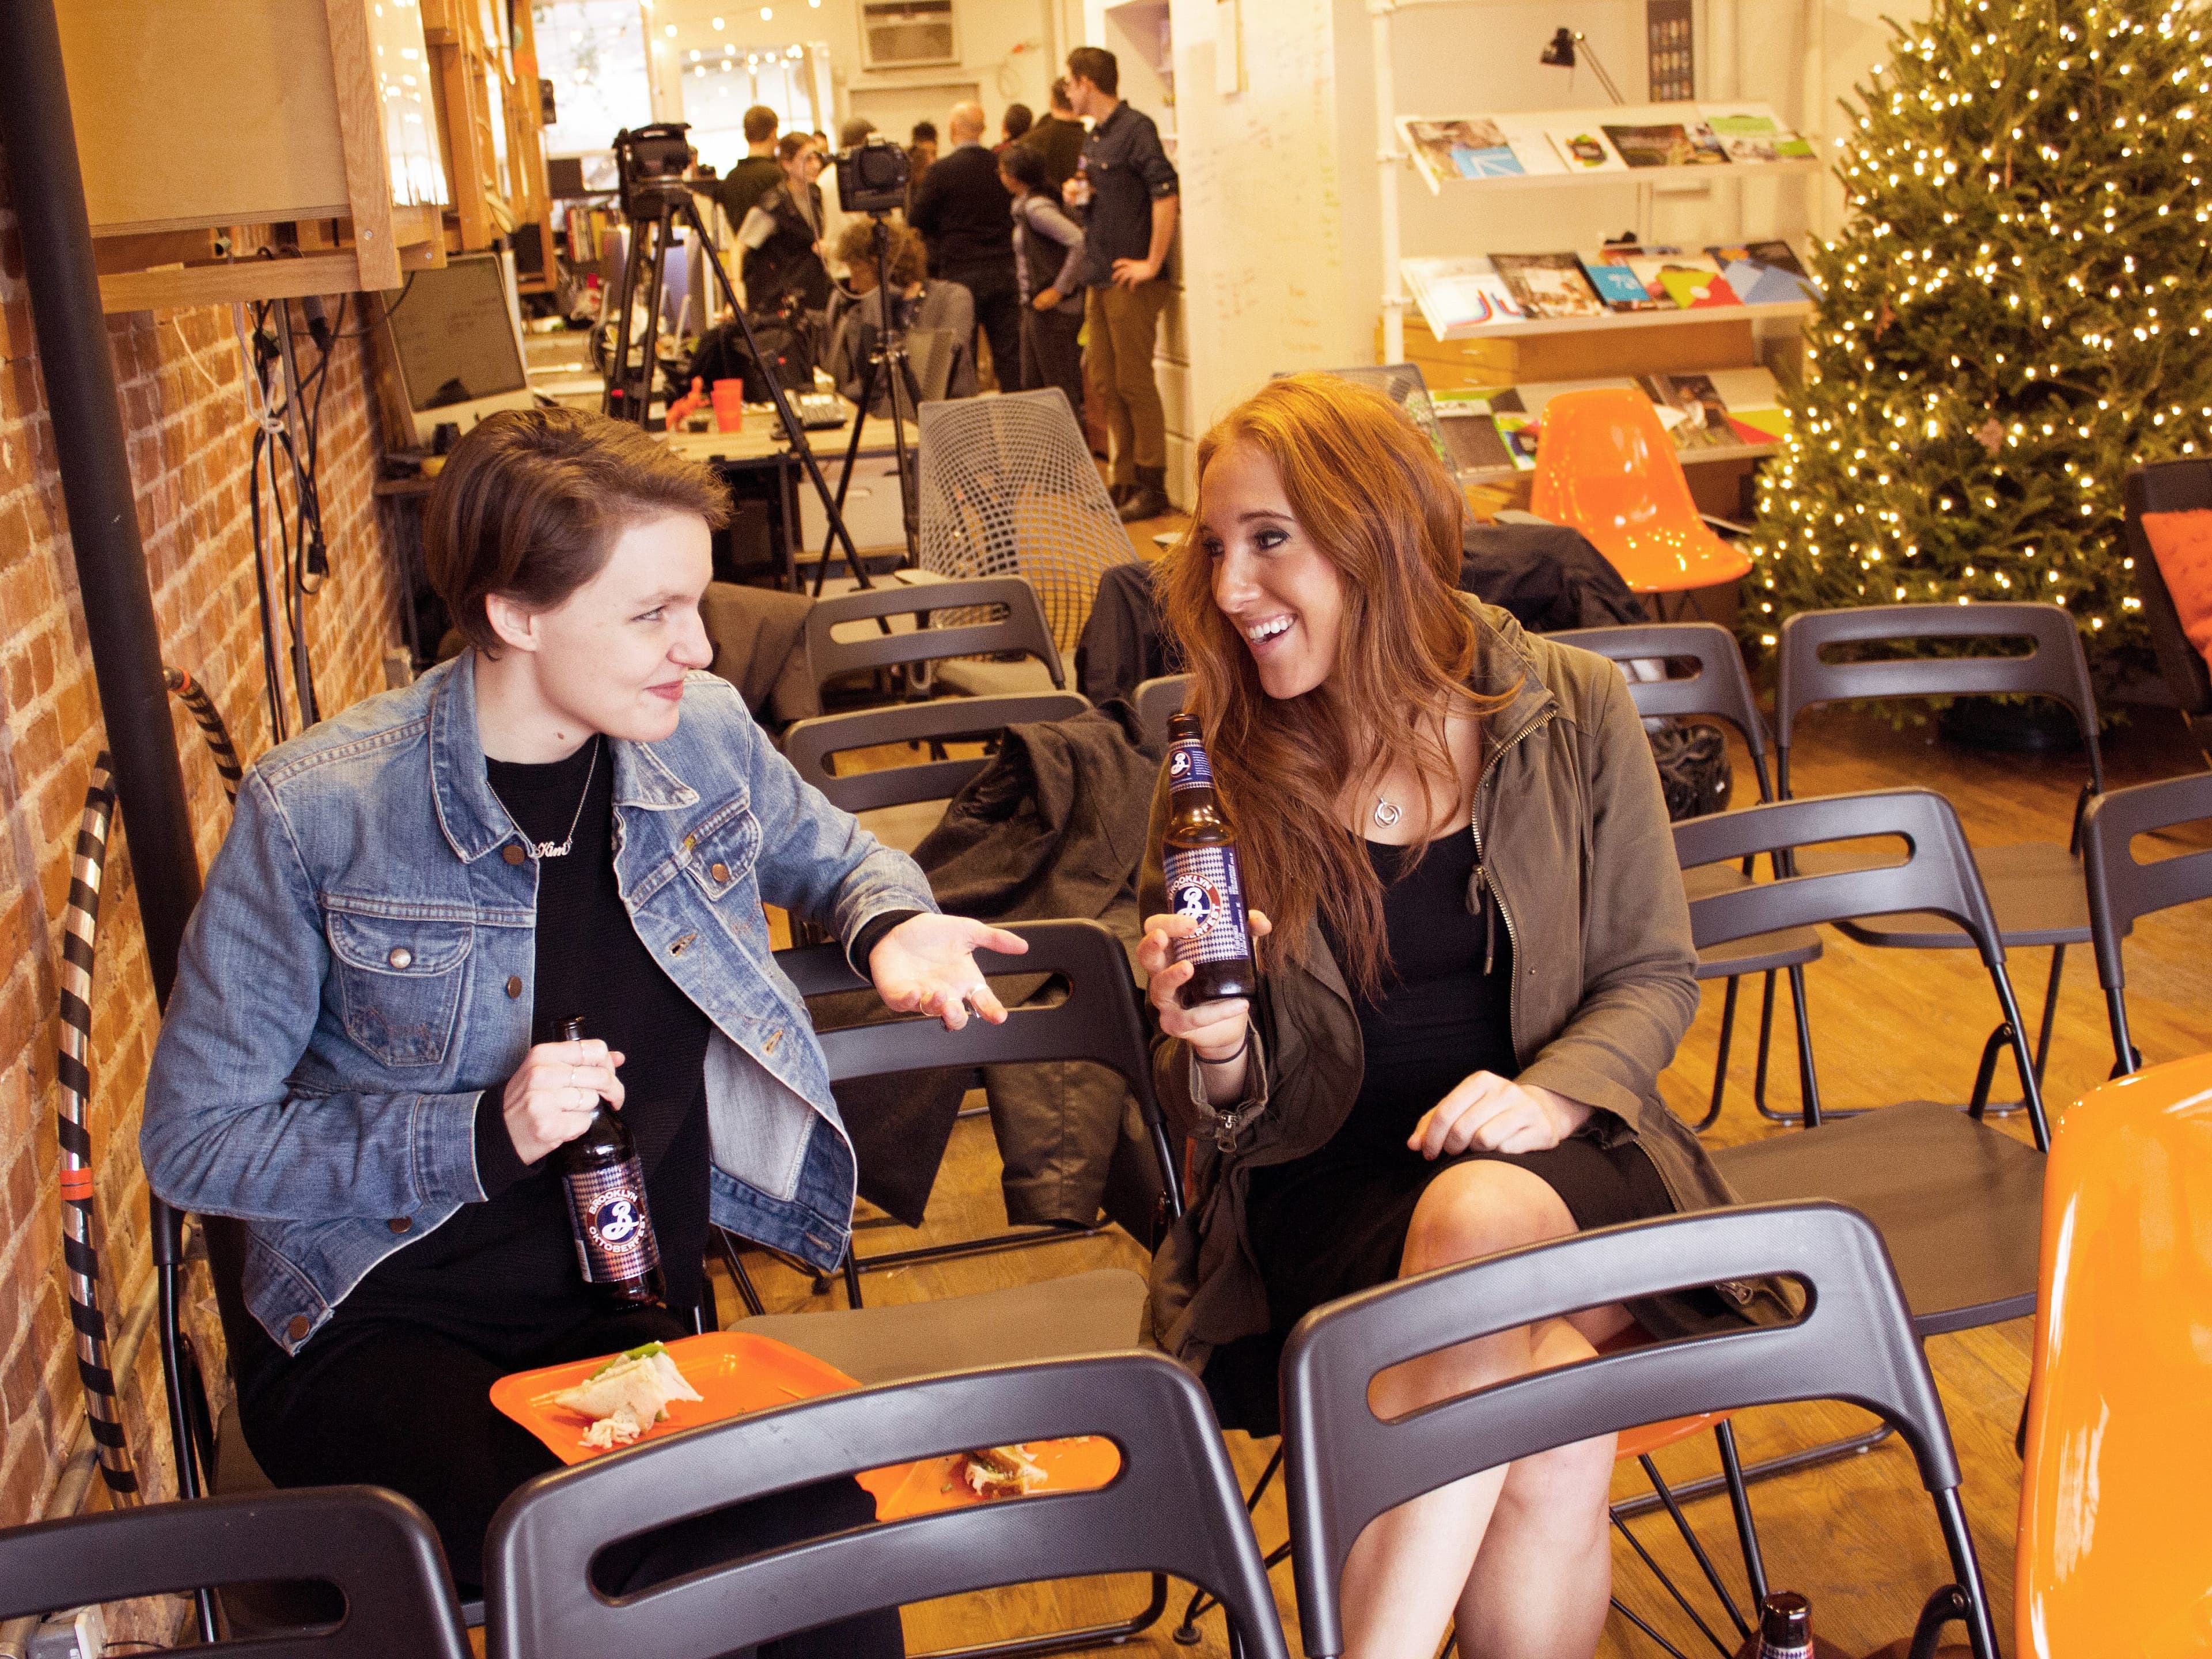 Two women are sitting on black folding chairs in a room with holiday decorations and string lights. They are smiling and holding bottles, engaging in a lively conversation. One is wearing a denim jacket, and the other is in a green jacket. A Christmas tree is in the background.